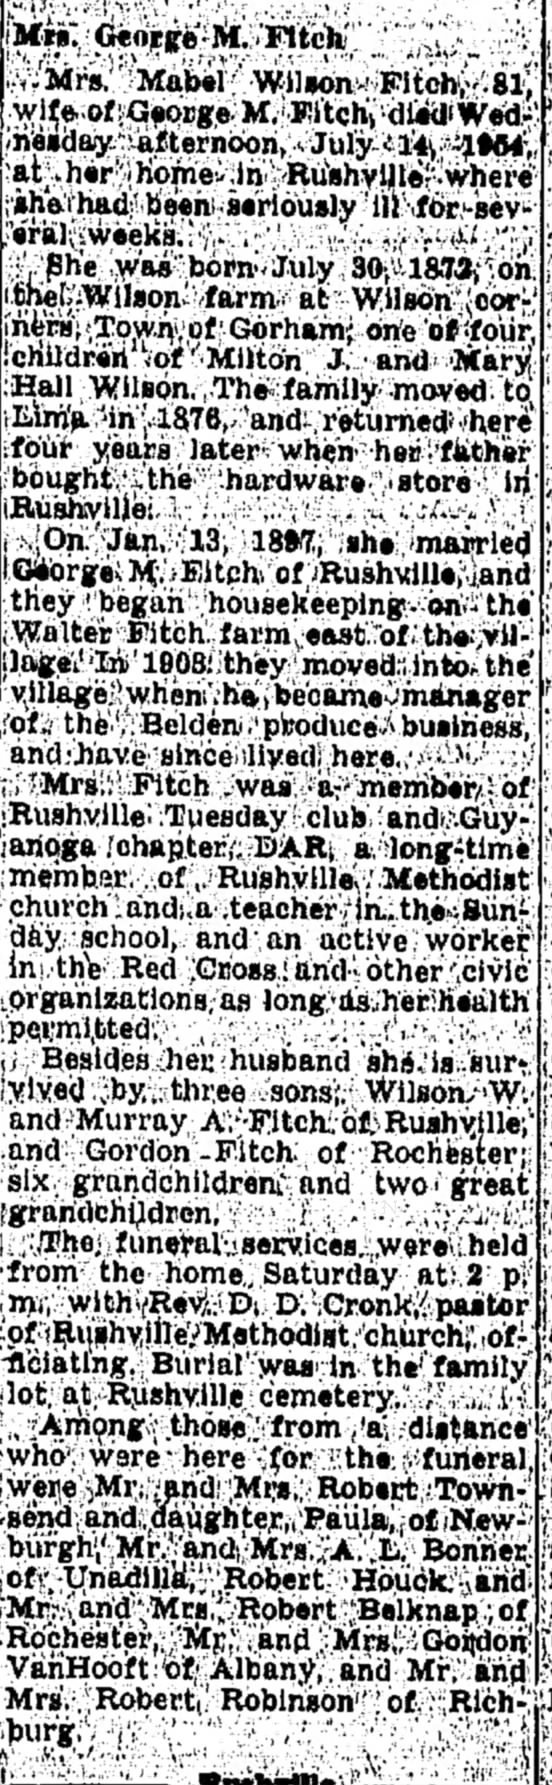 Mabel Wilson Fitch Obituary
JUly 1954